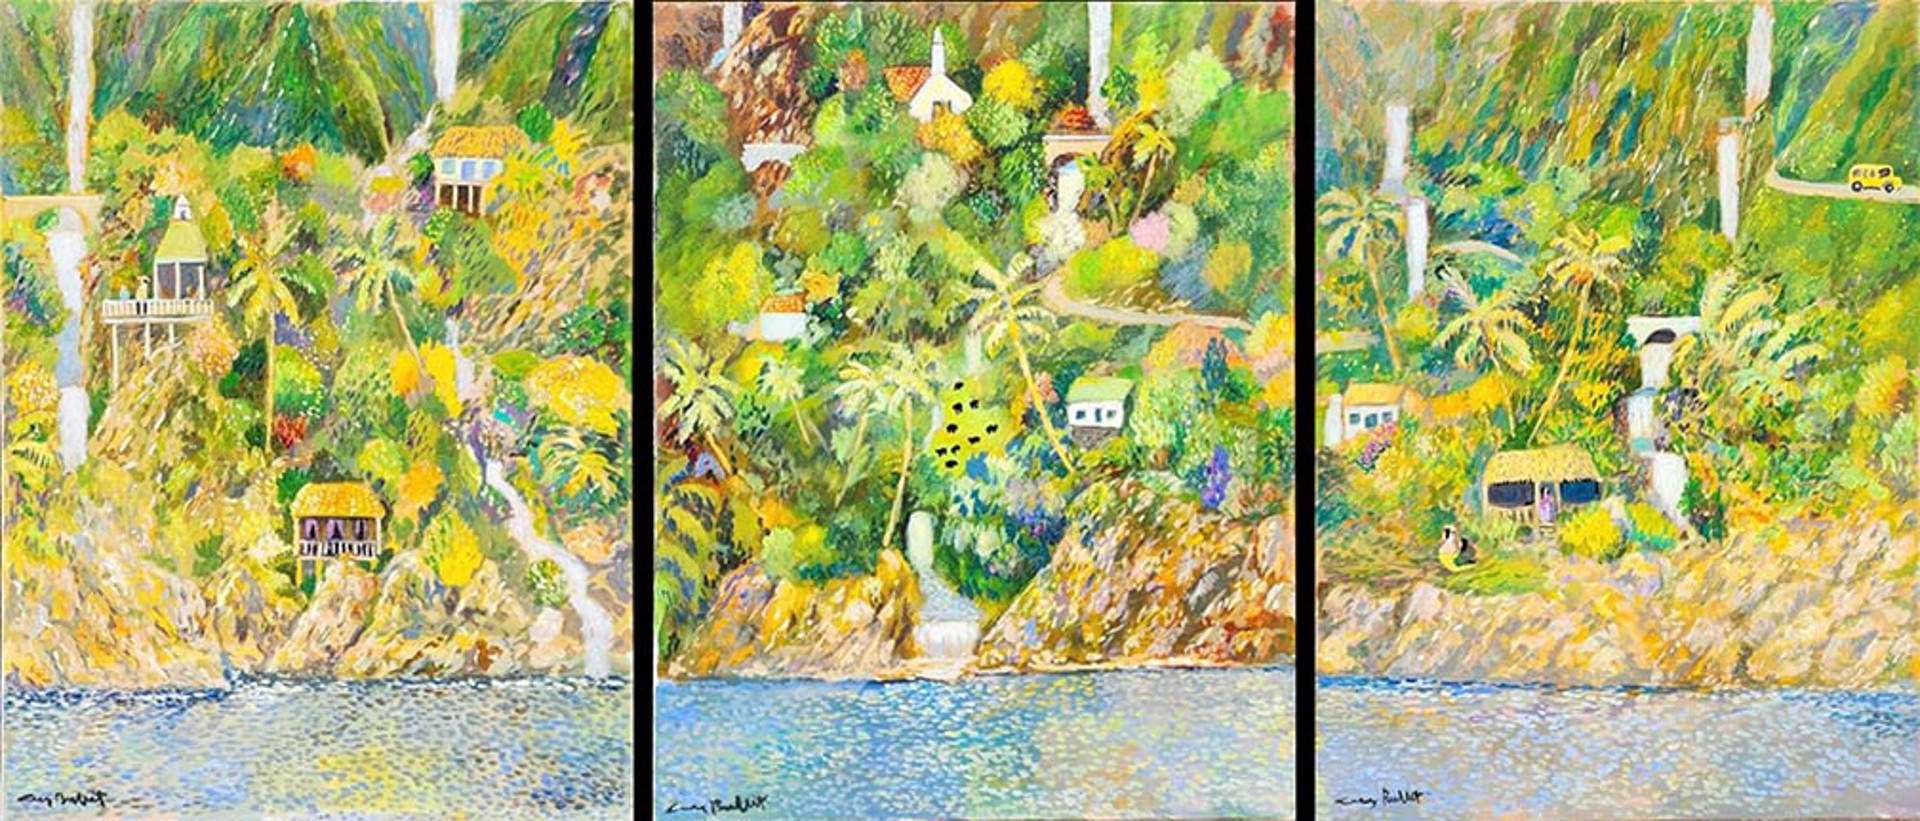 Road To Hana (Triptych) by Guy Buffet